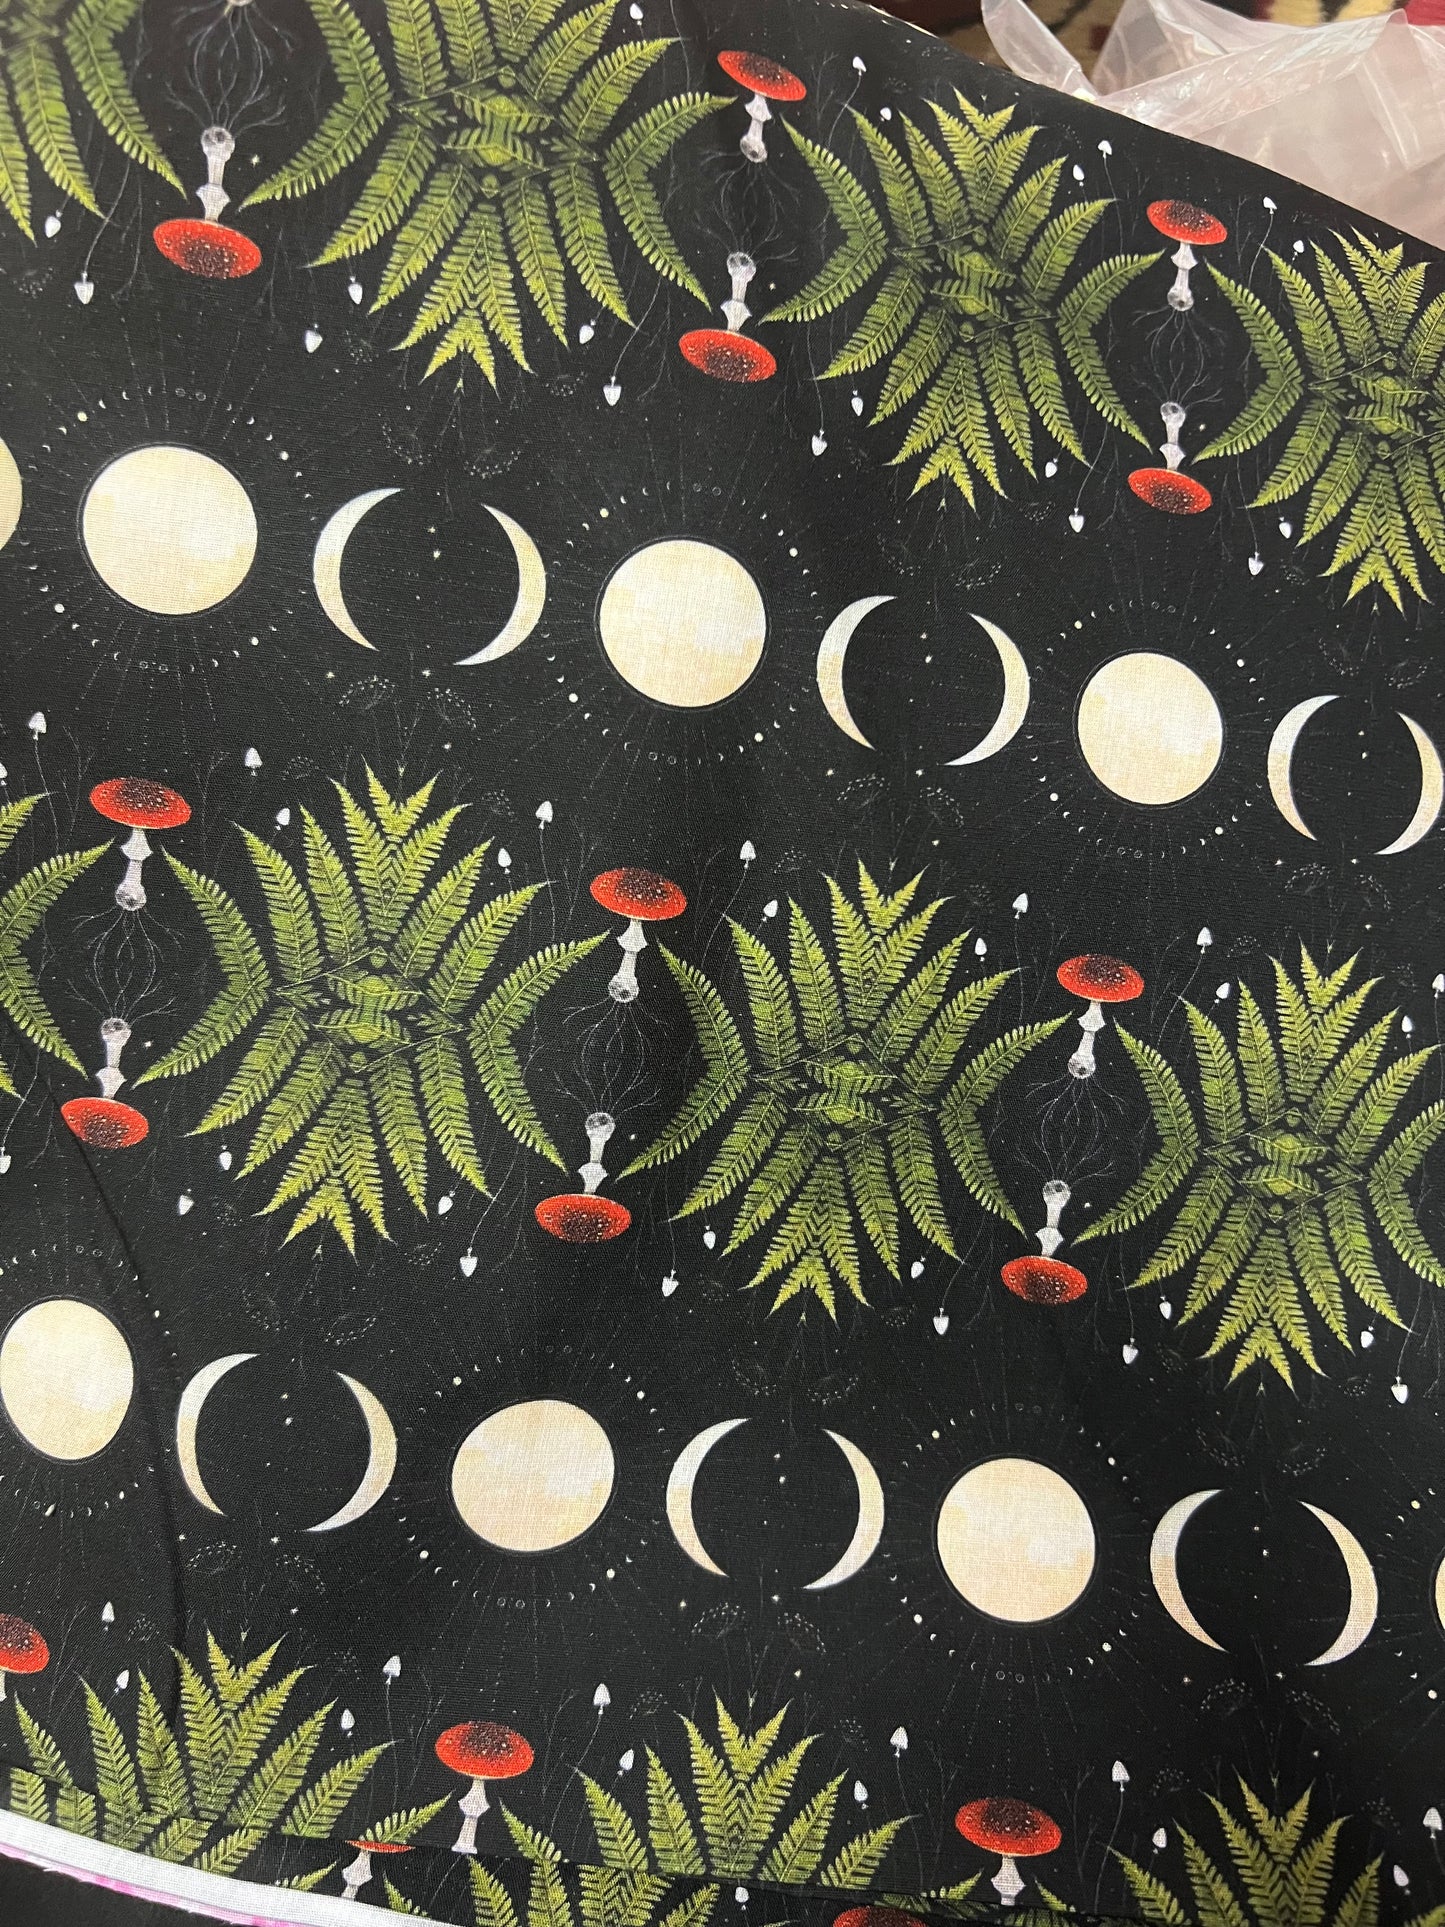 COTTAGECORE TRIPLE MOON - Polycotton Fabric from Japan